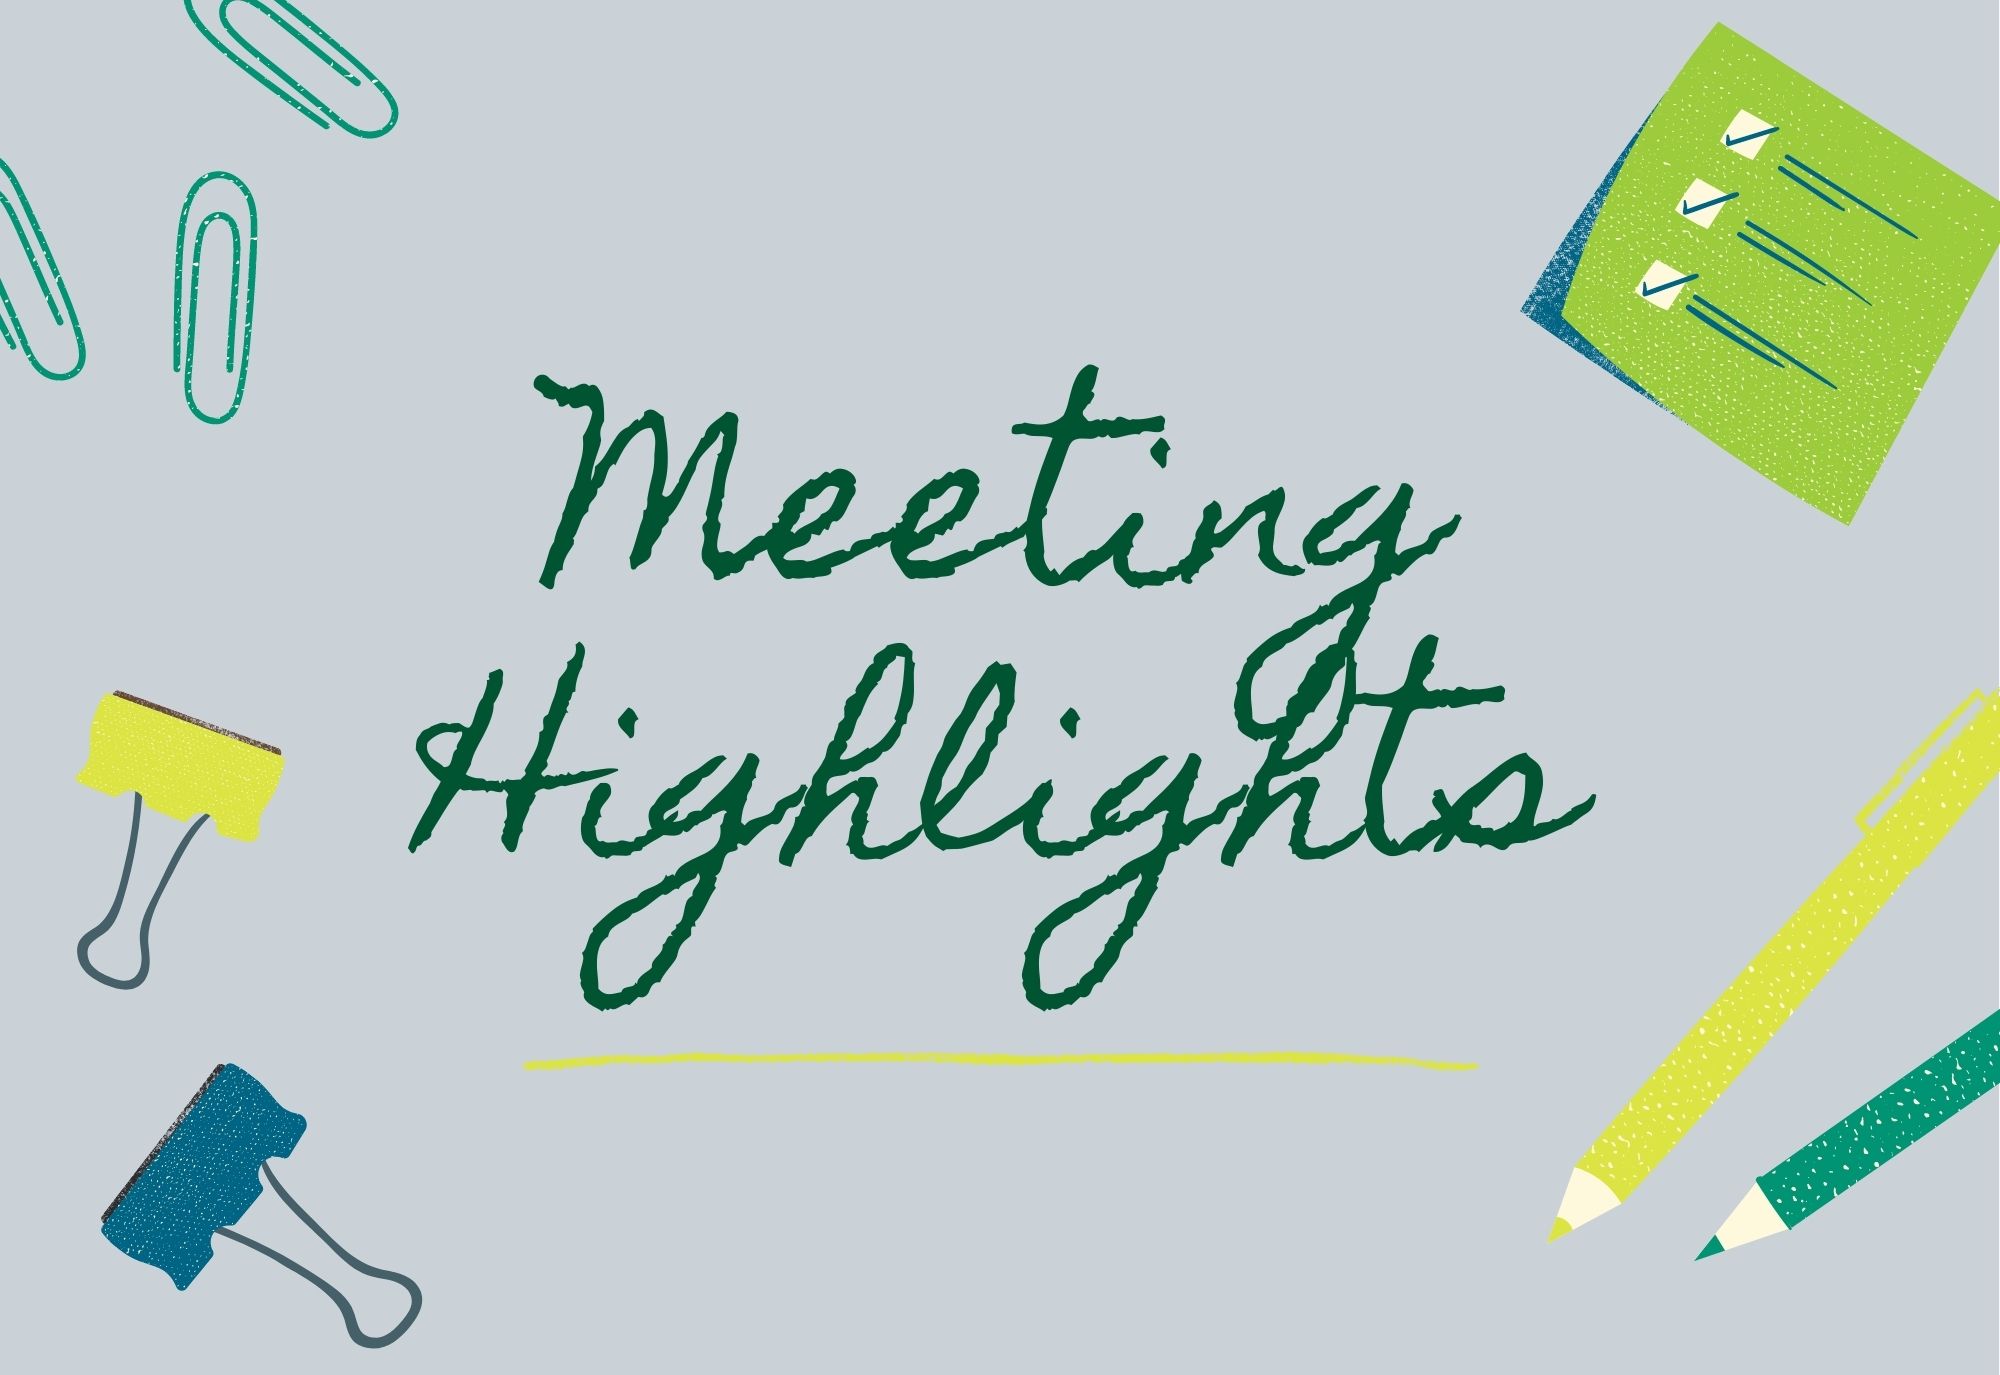 meeting highlights on a background with various school supplies